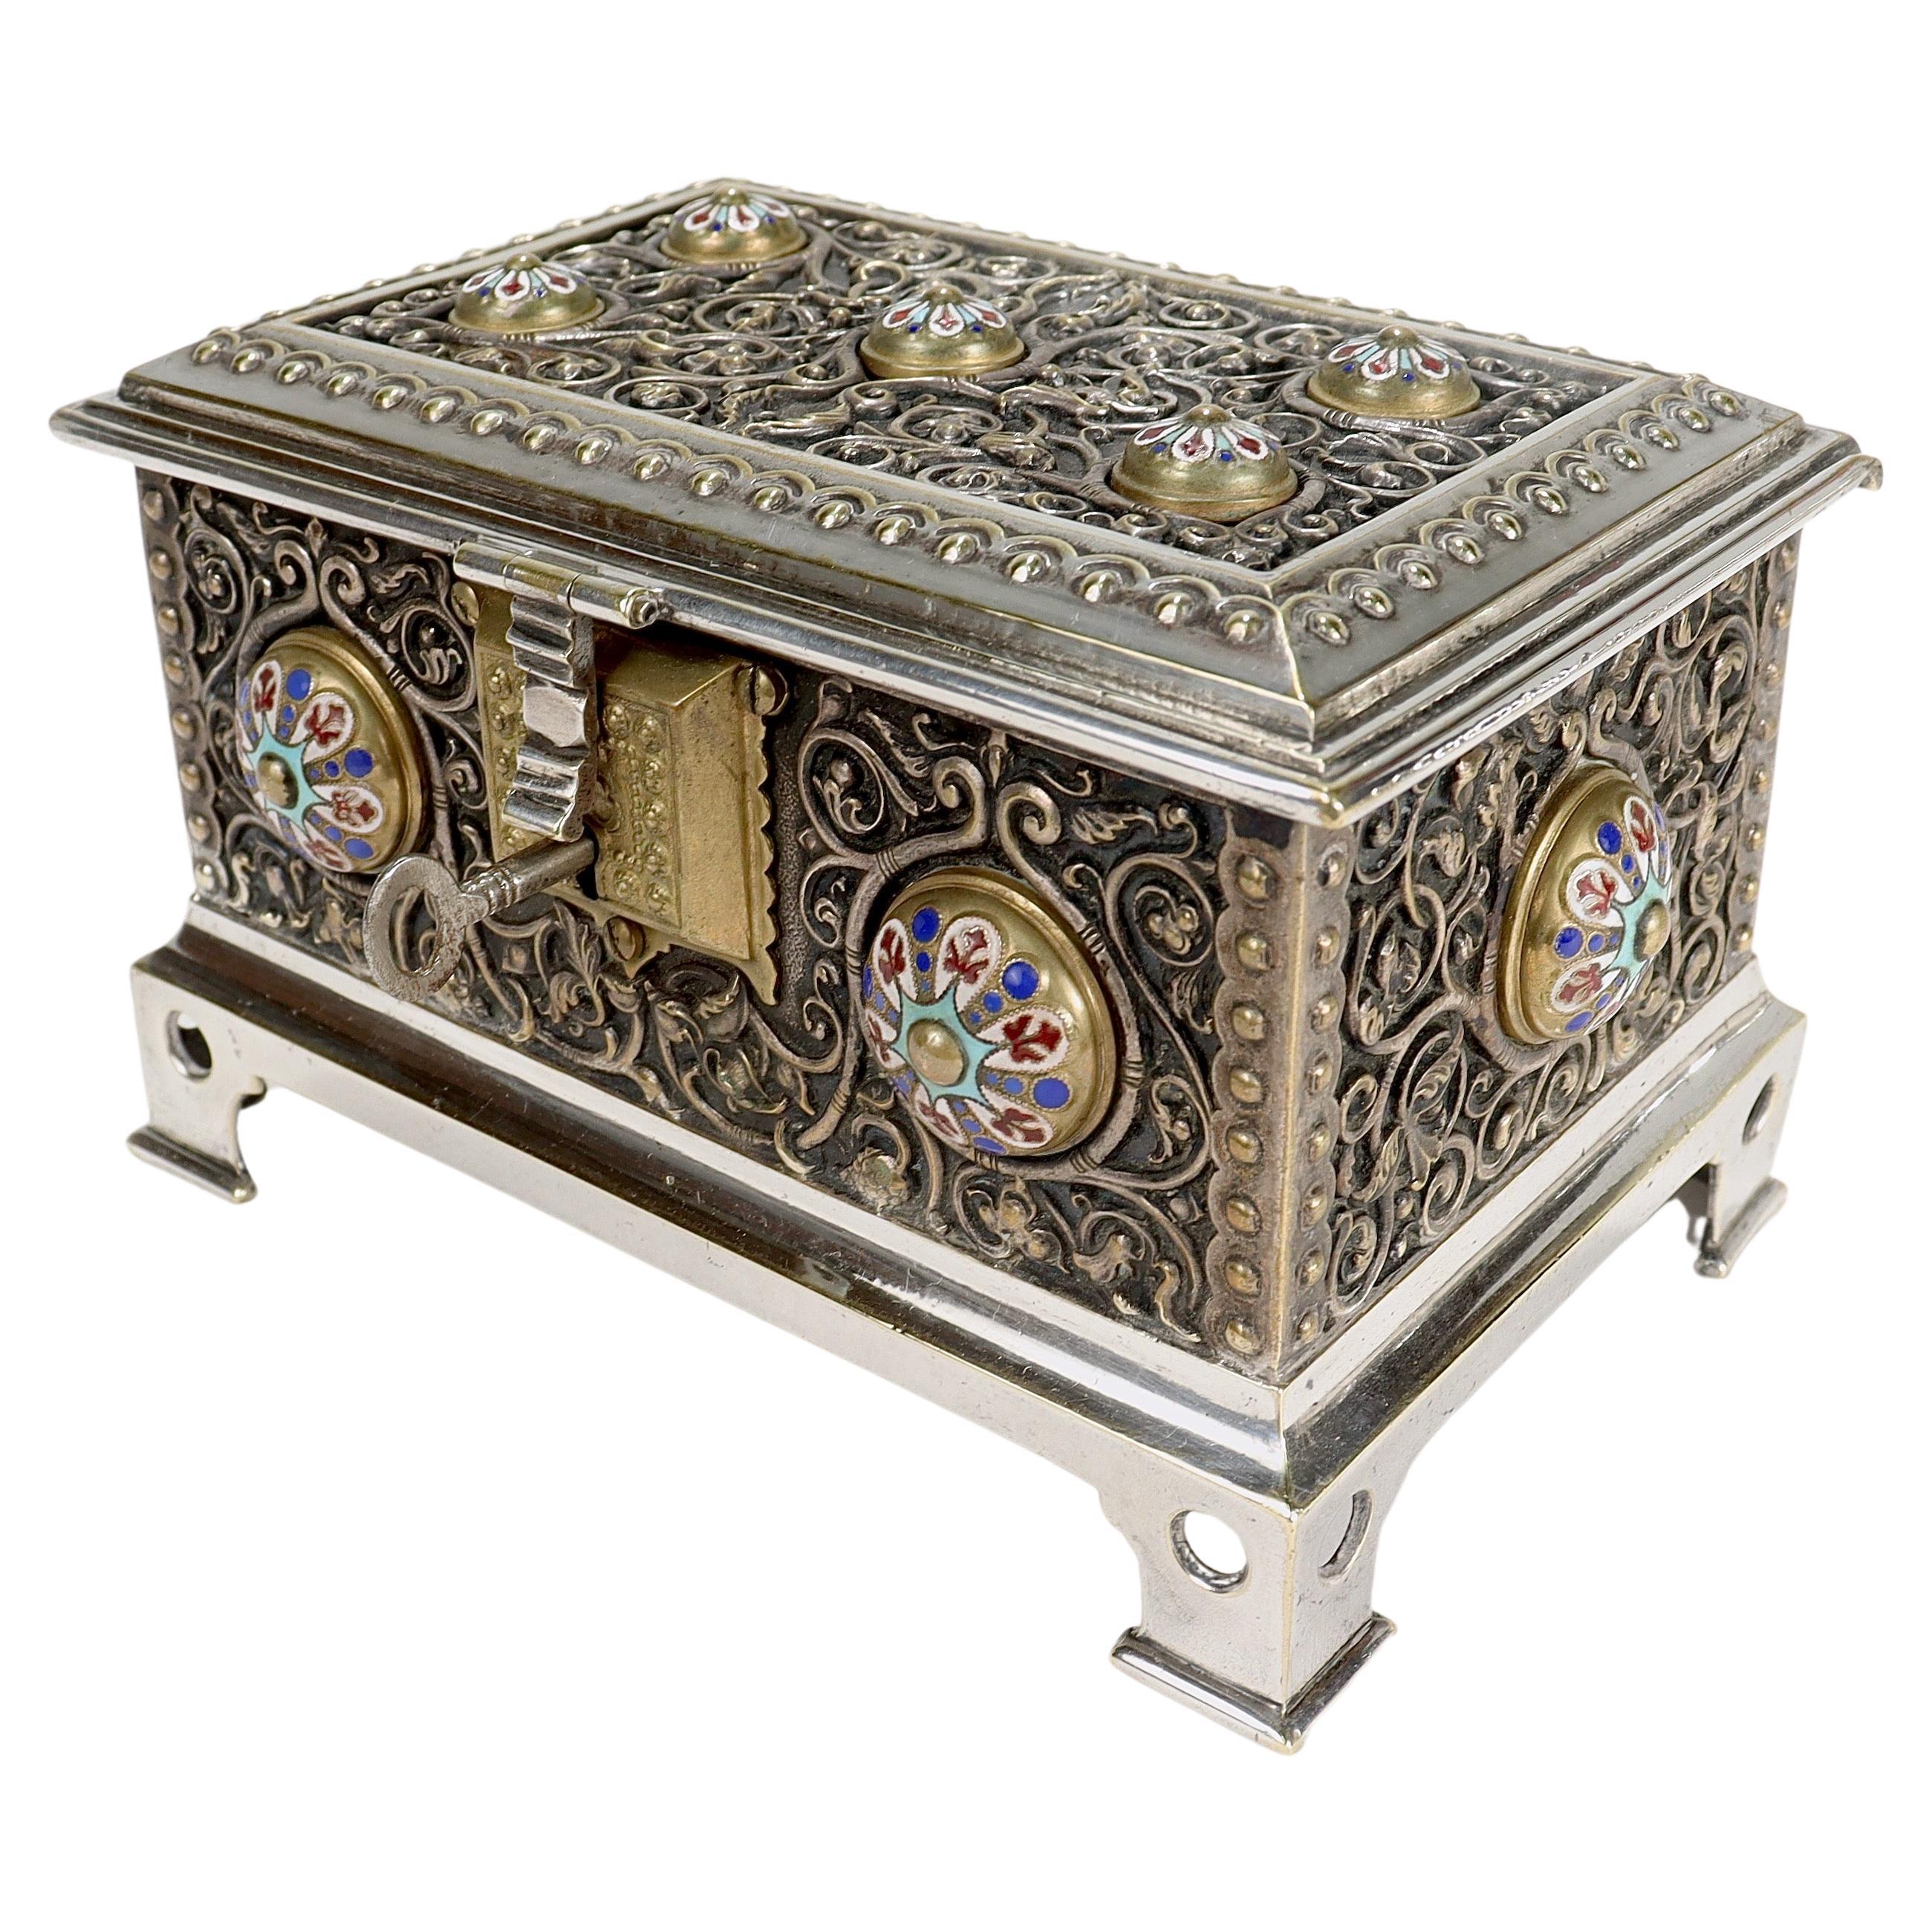 Antique Silver Plated & Enameled Table Box or Casket in the Russian Taste For Sale